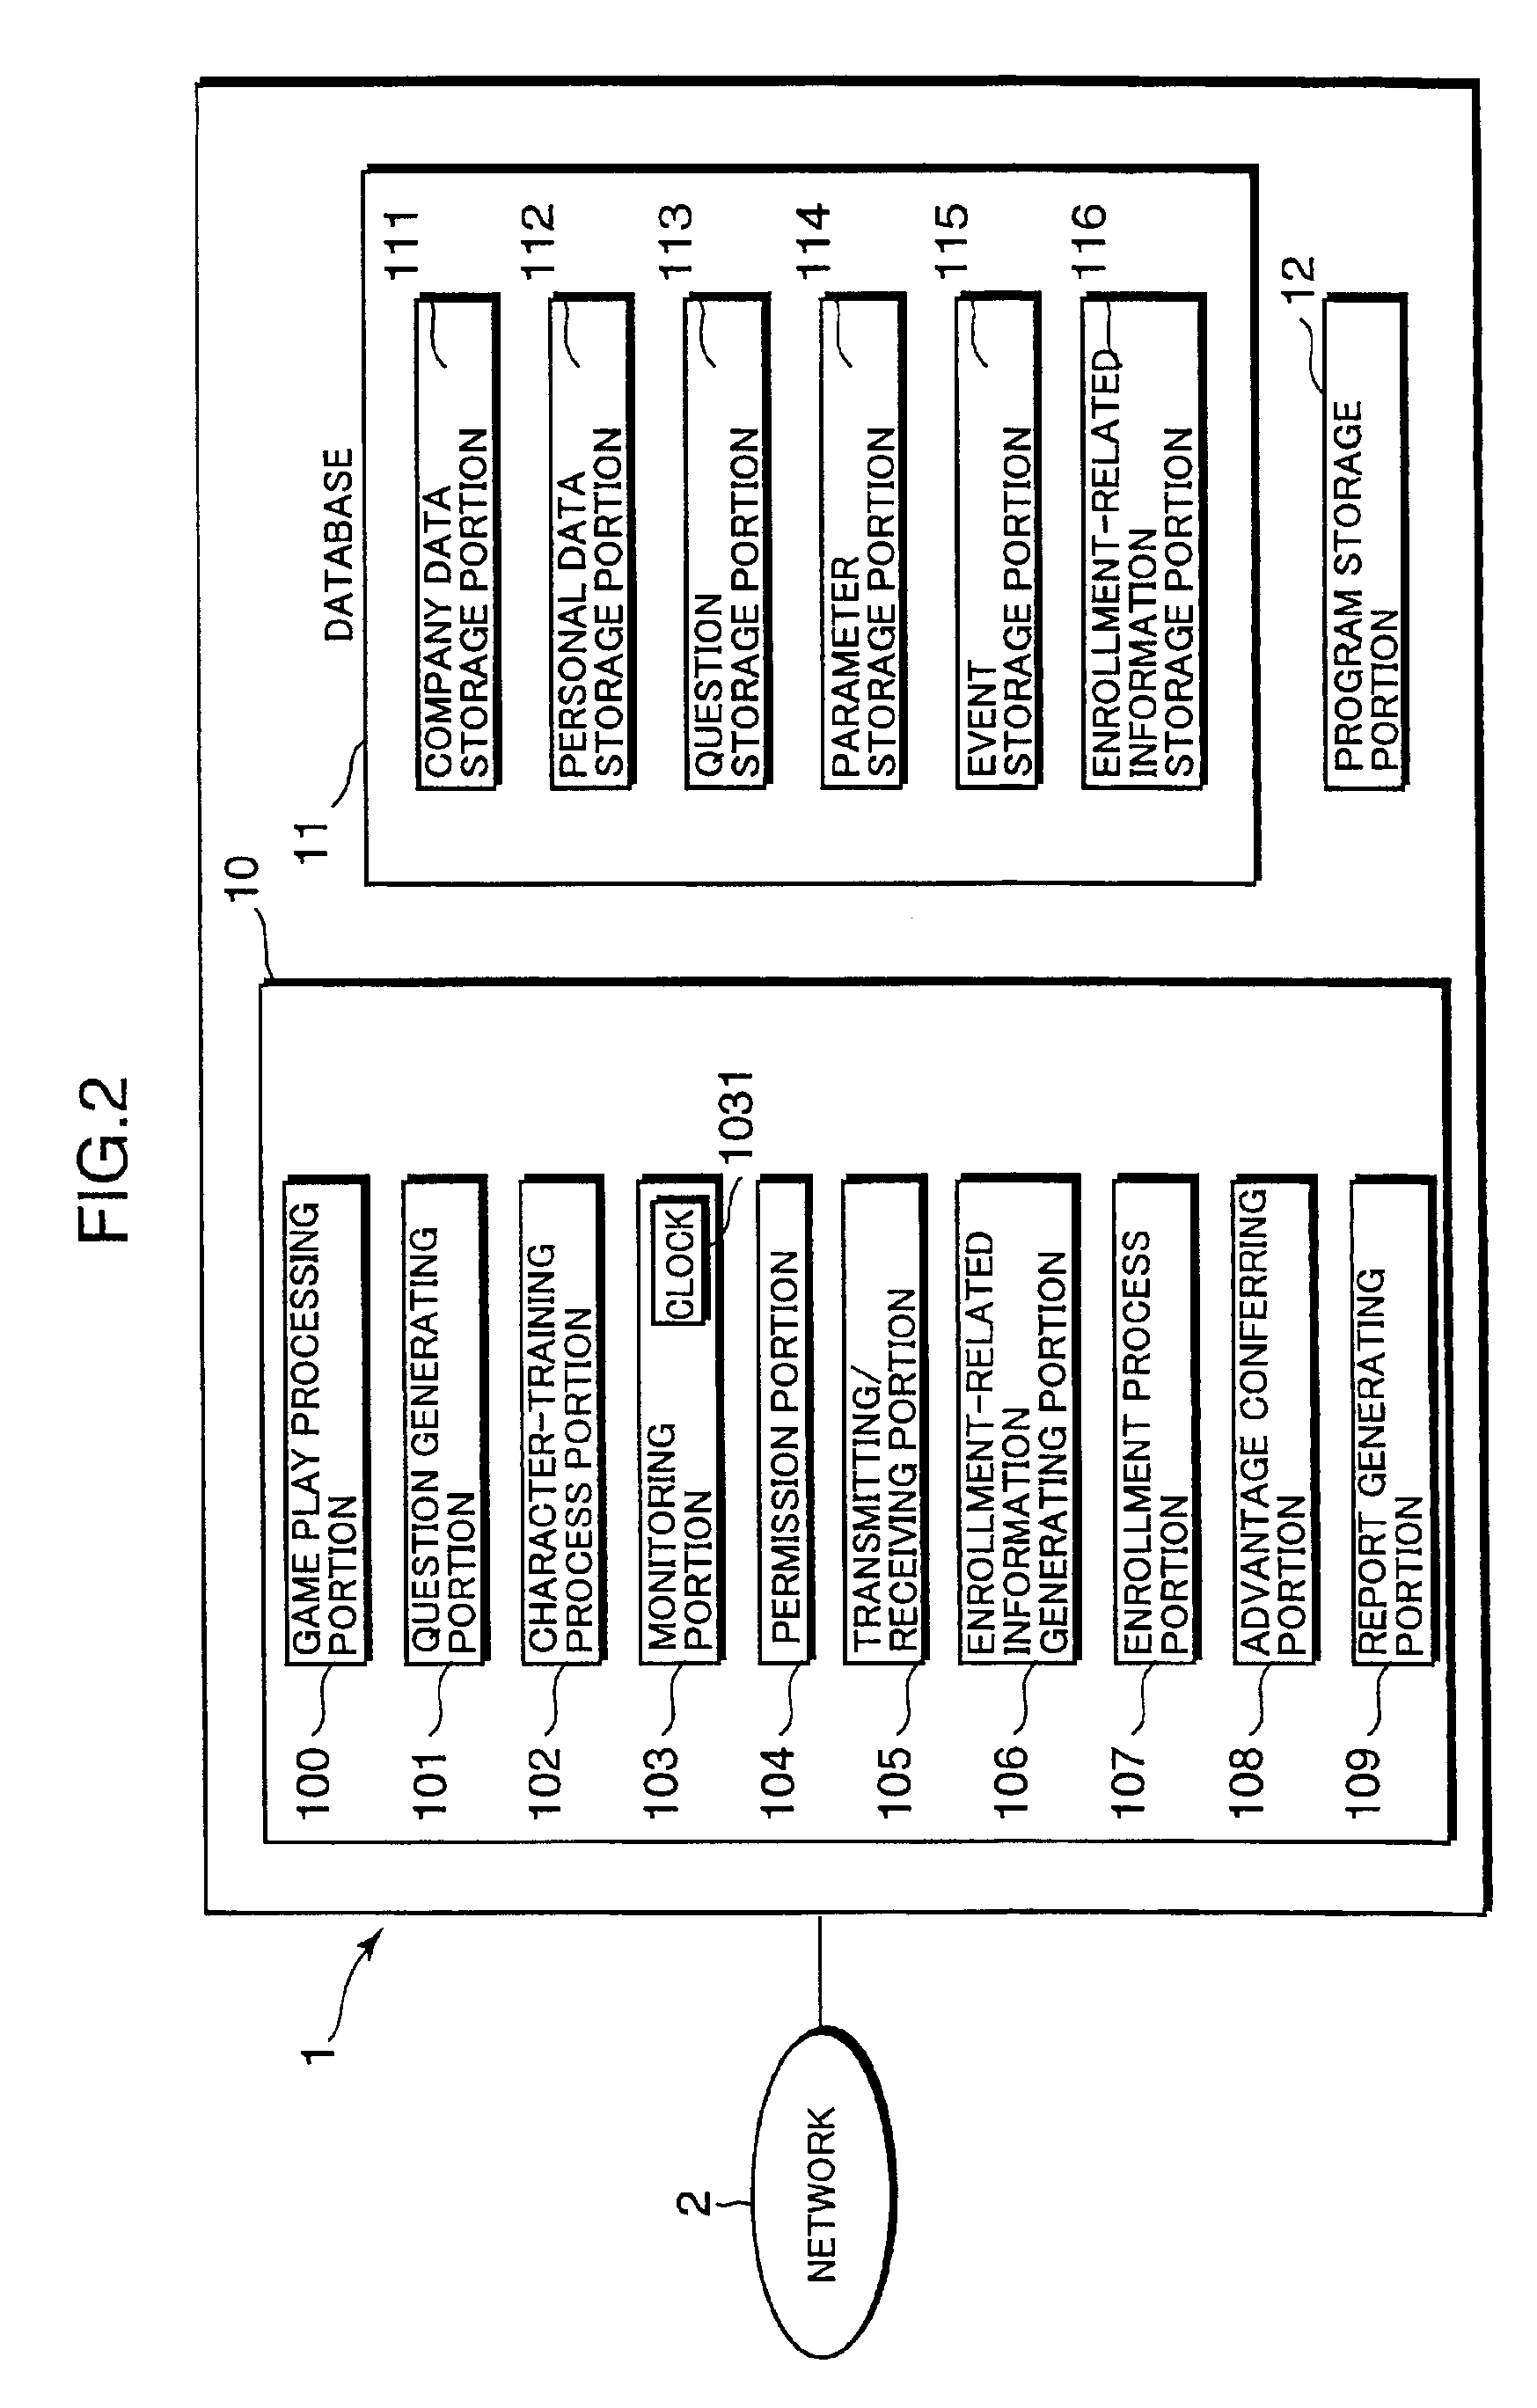 Net game system, processing method for playing net game, and computer-readable storage medium for storing program for playing net game